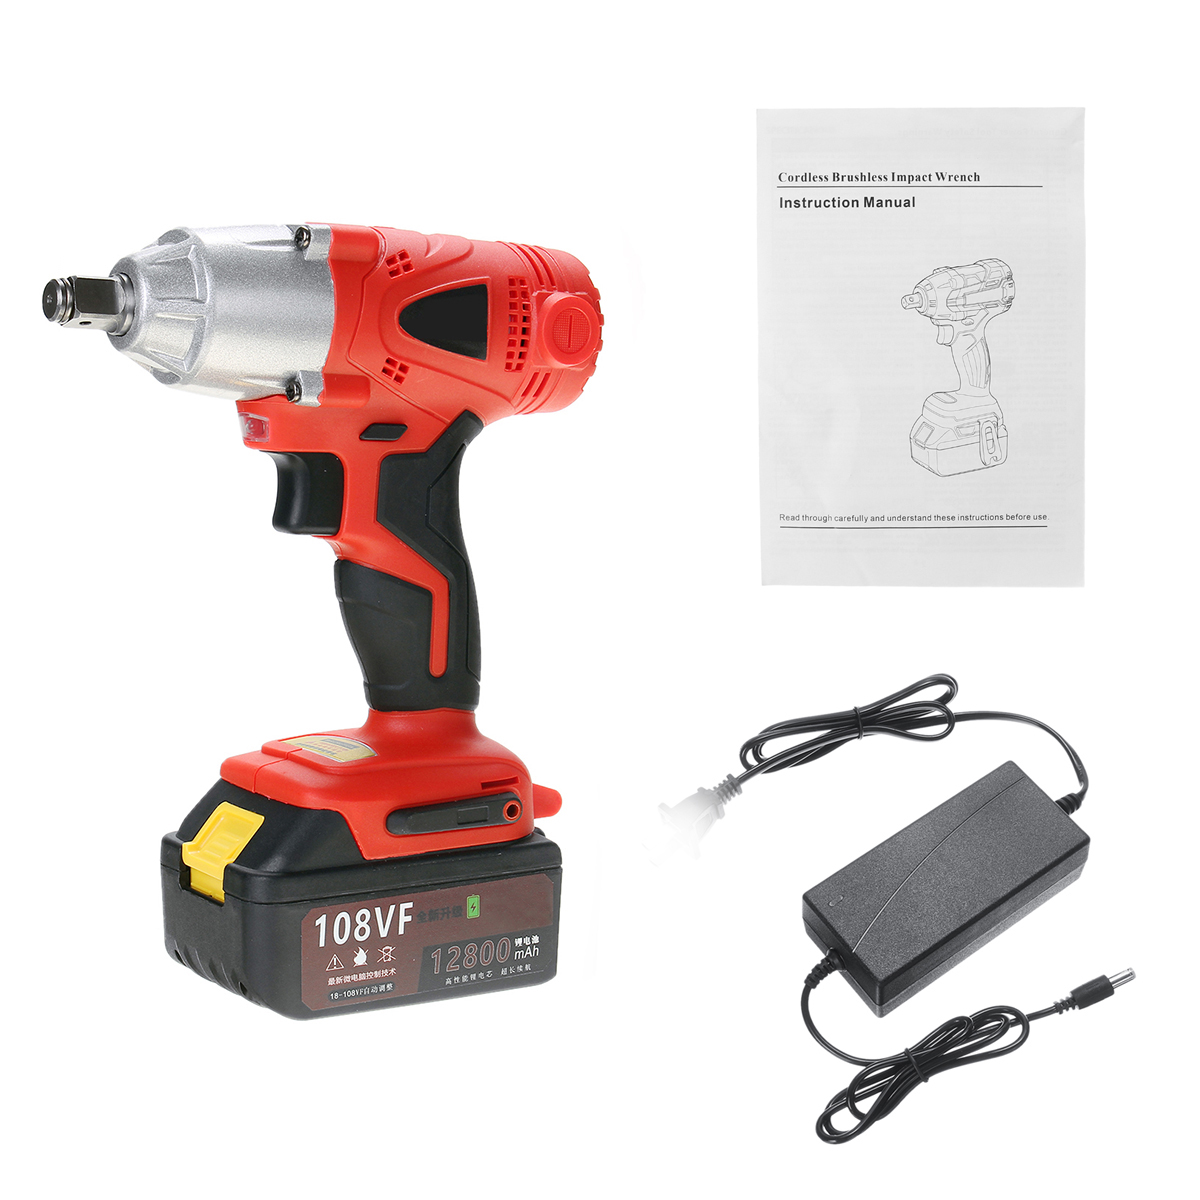 108VF-12800mAh-330Nm-Brushless-Cordless-Electric-Wrench-Impact-Driver-Power-Tool-Rechargeable-Lithiu-1577976-2